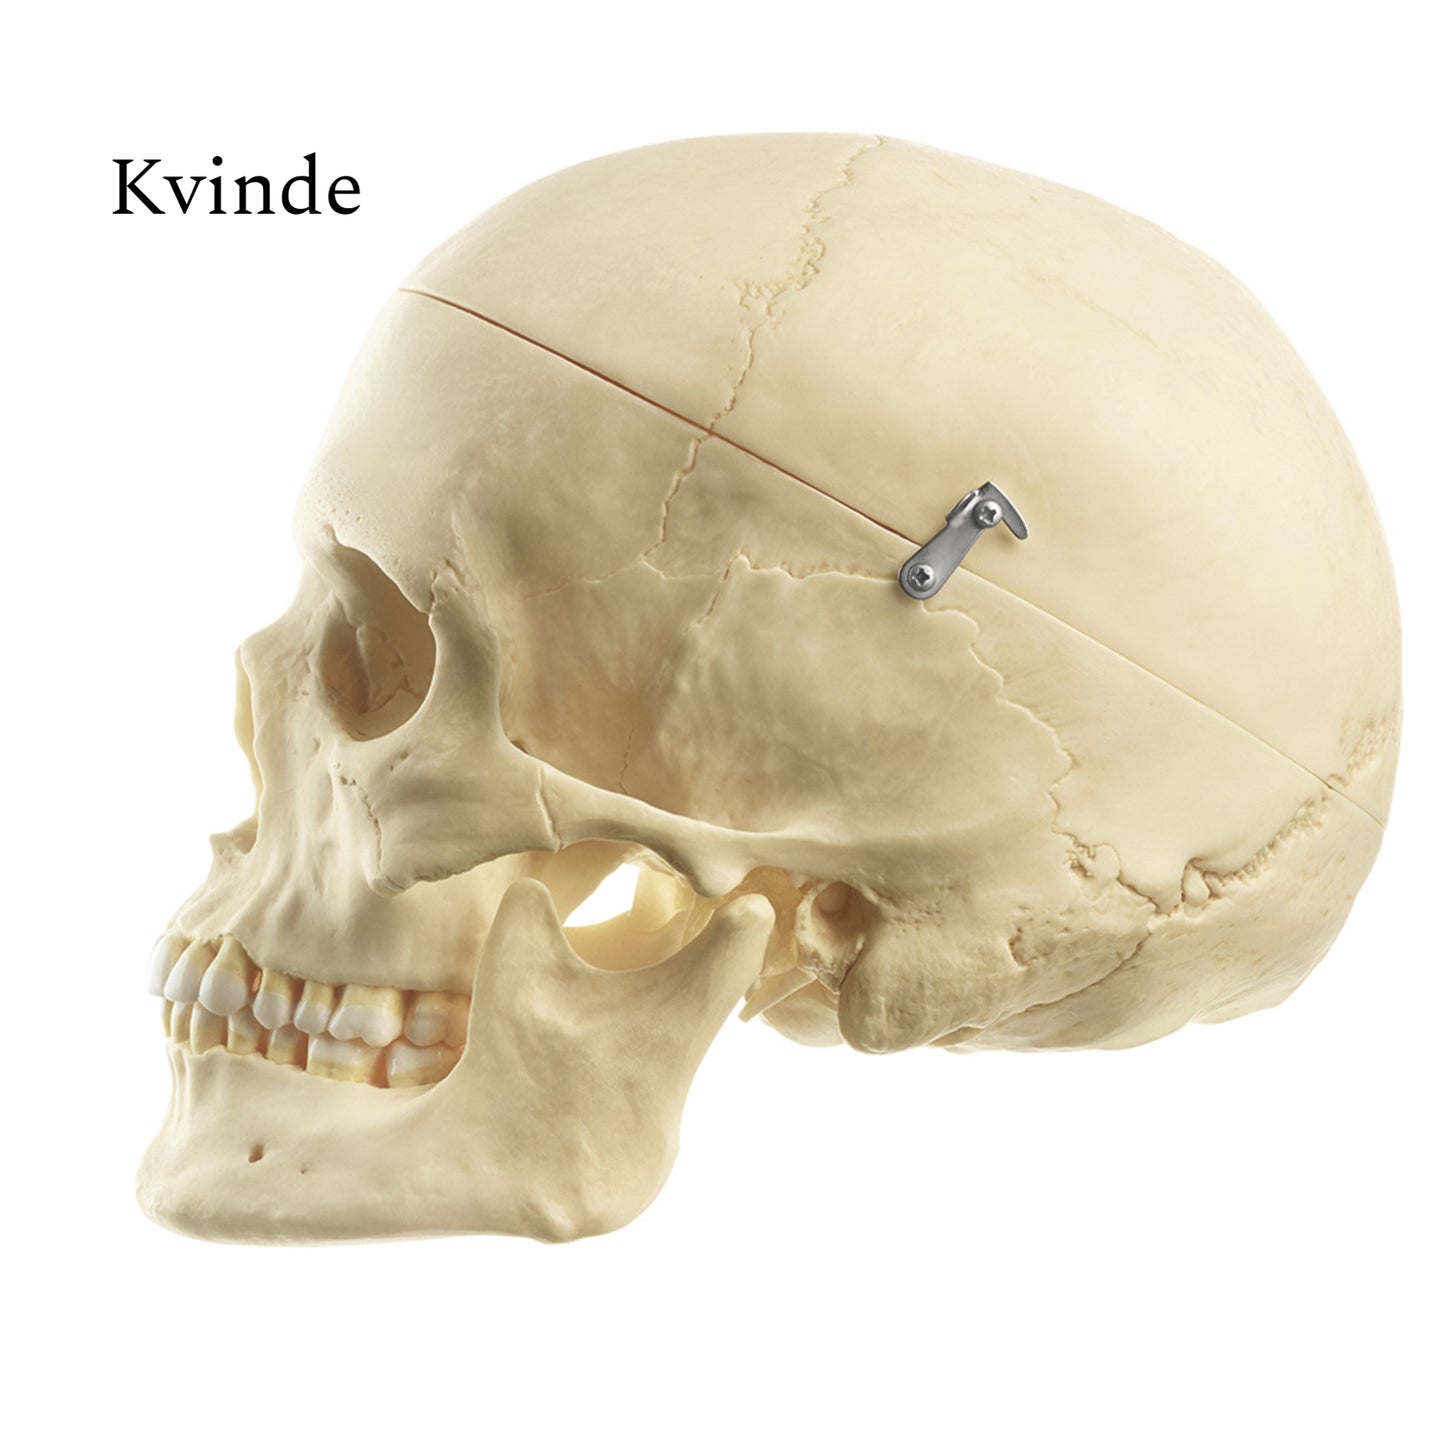 Particularly lifelike skull model in adult size. Can be separated into 3 parts